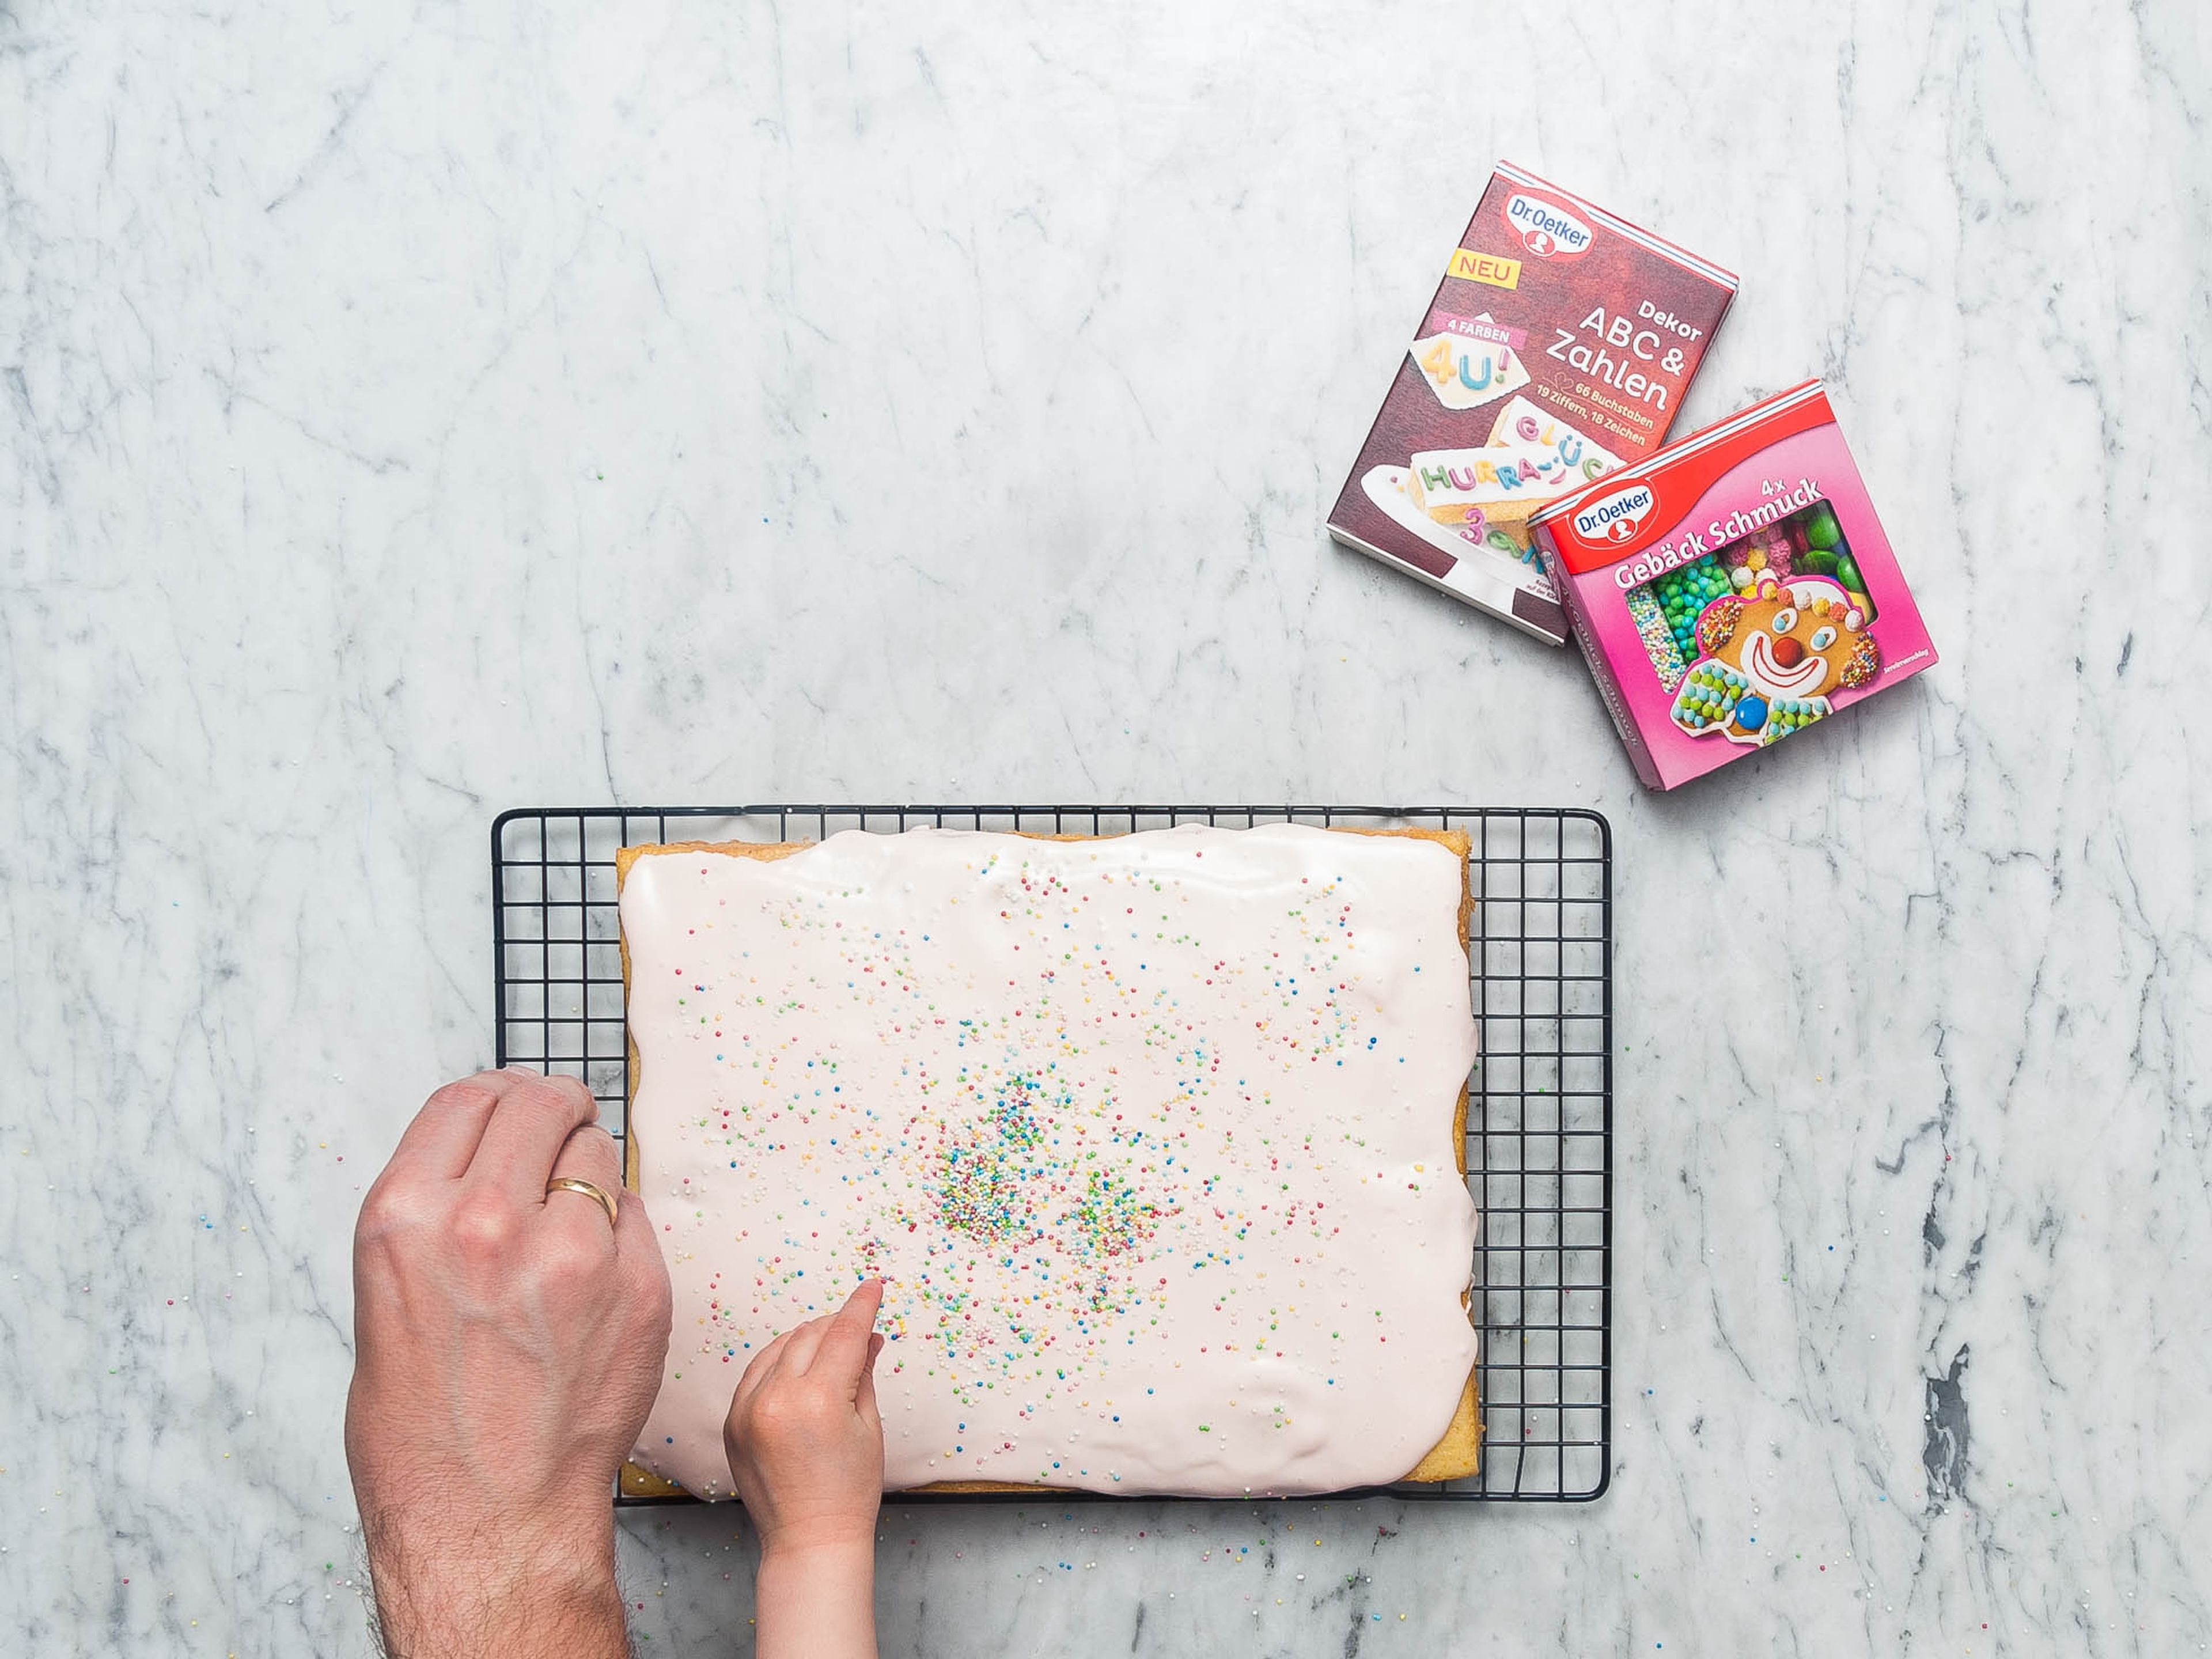 Smooth frosting over cake, decorate with sprinkles if desired, and enjoy!